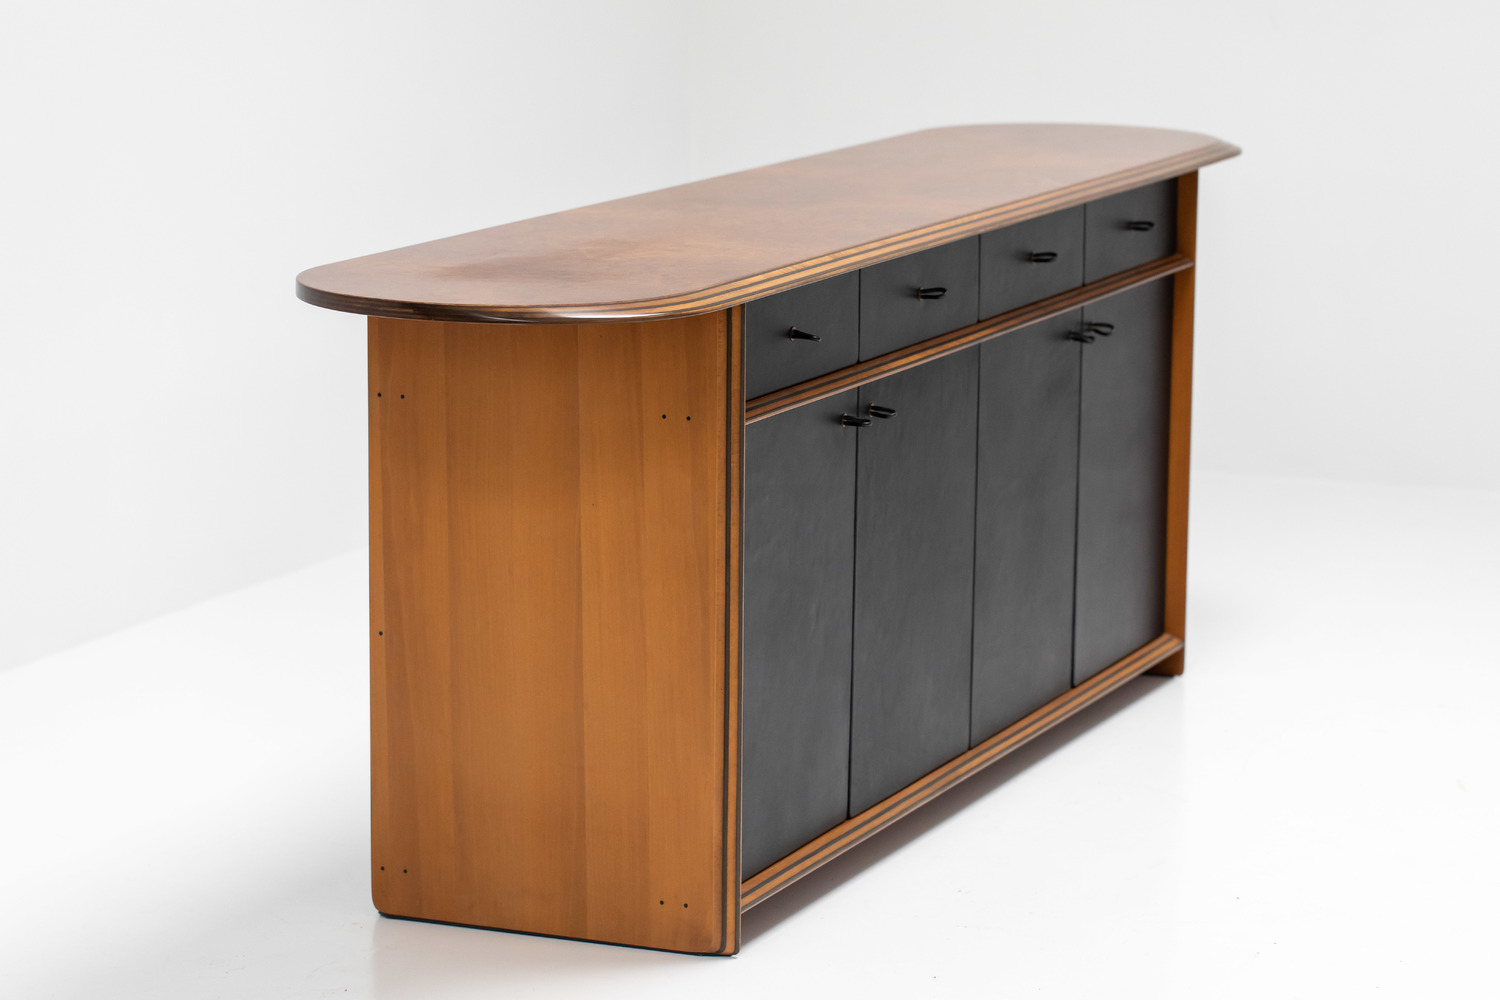 Sideboard by Afra and Tobia Scarpa for Maxalto